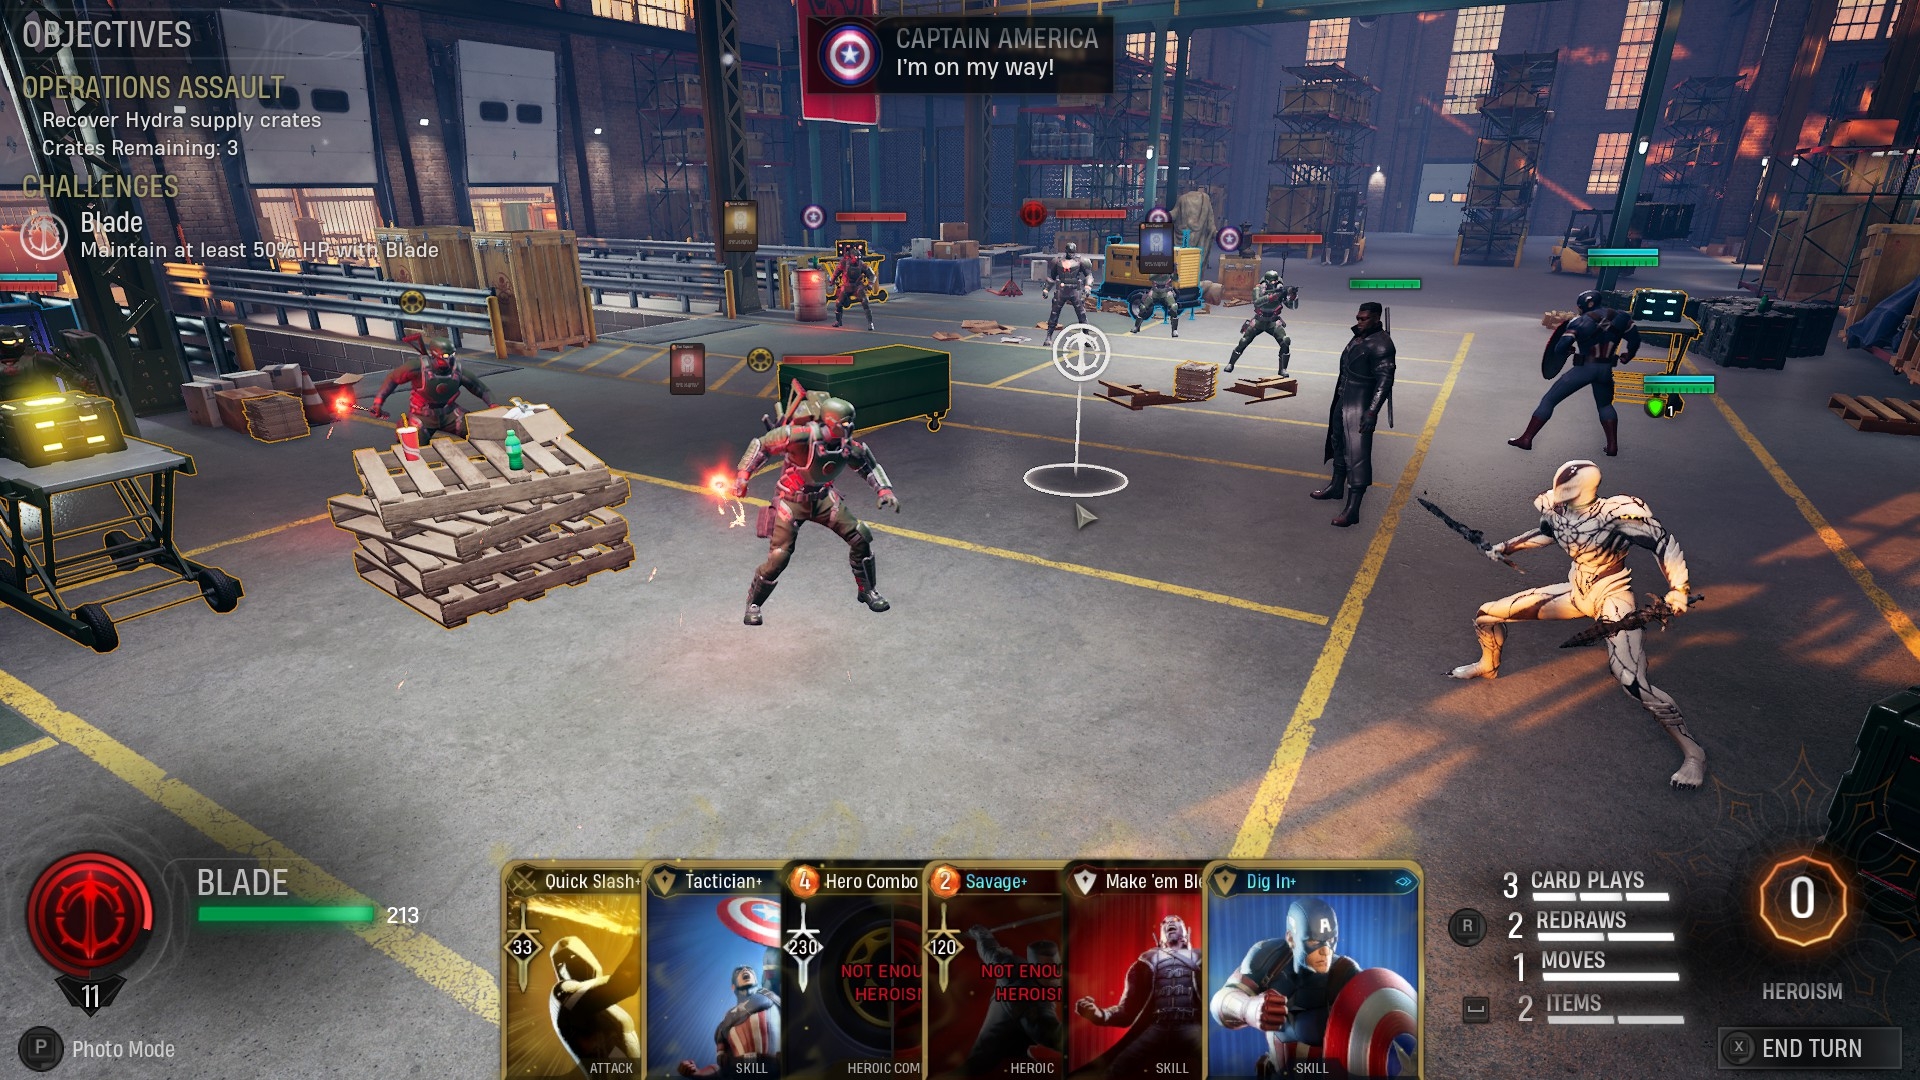 Get a Look at the Tactical Card-Based Marvel's Midnight Suns Gameplay